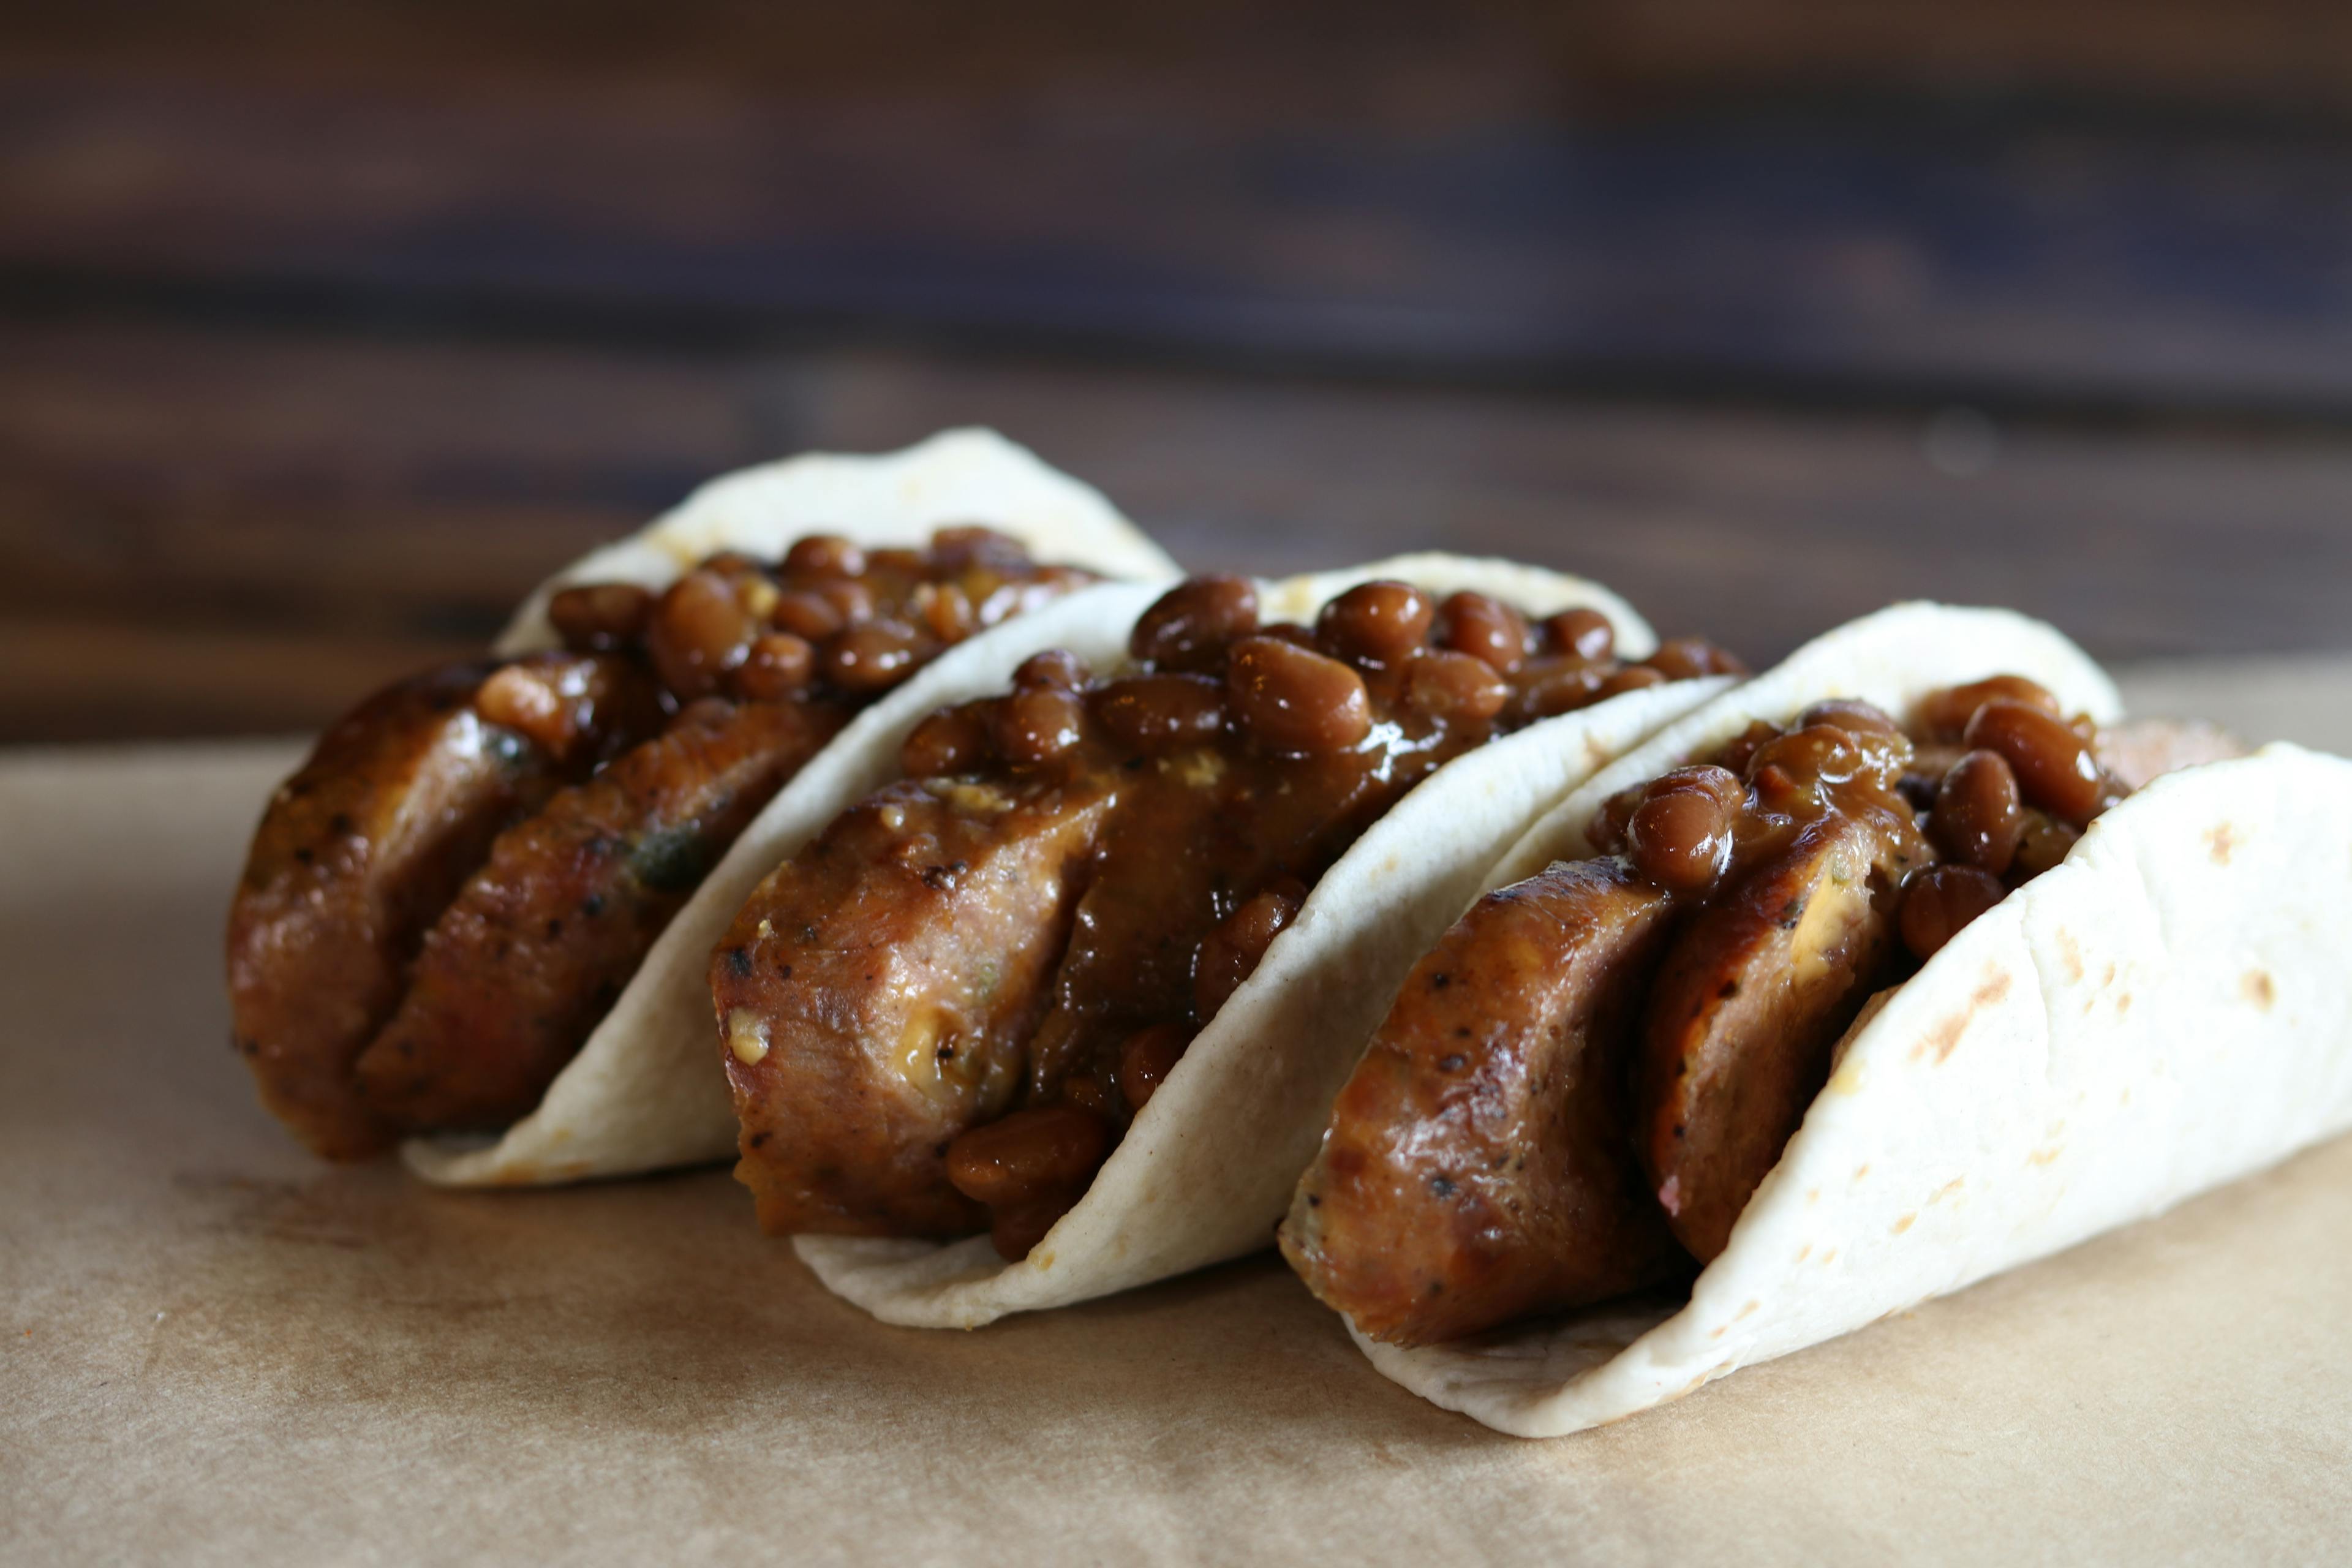 Dickey’s Barbecue Pit Features Frank & Beans Taco in October, Spicing Up a Childhood Favorite